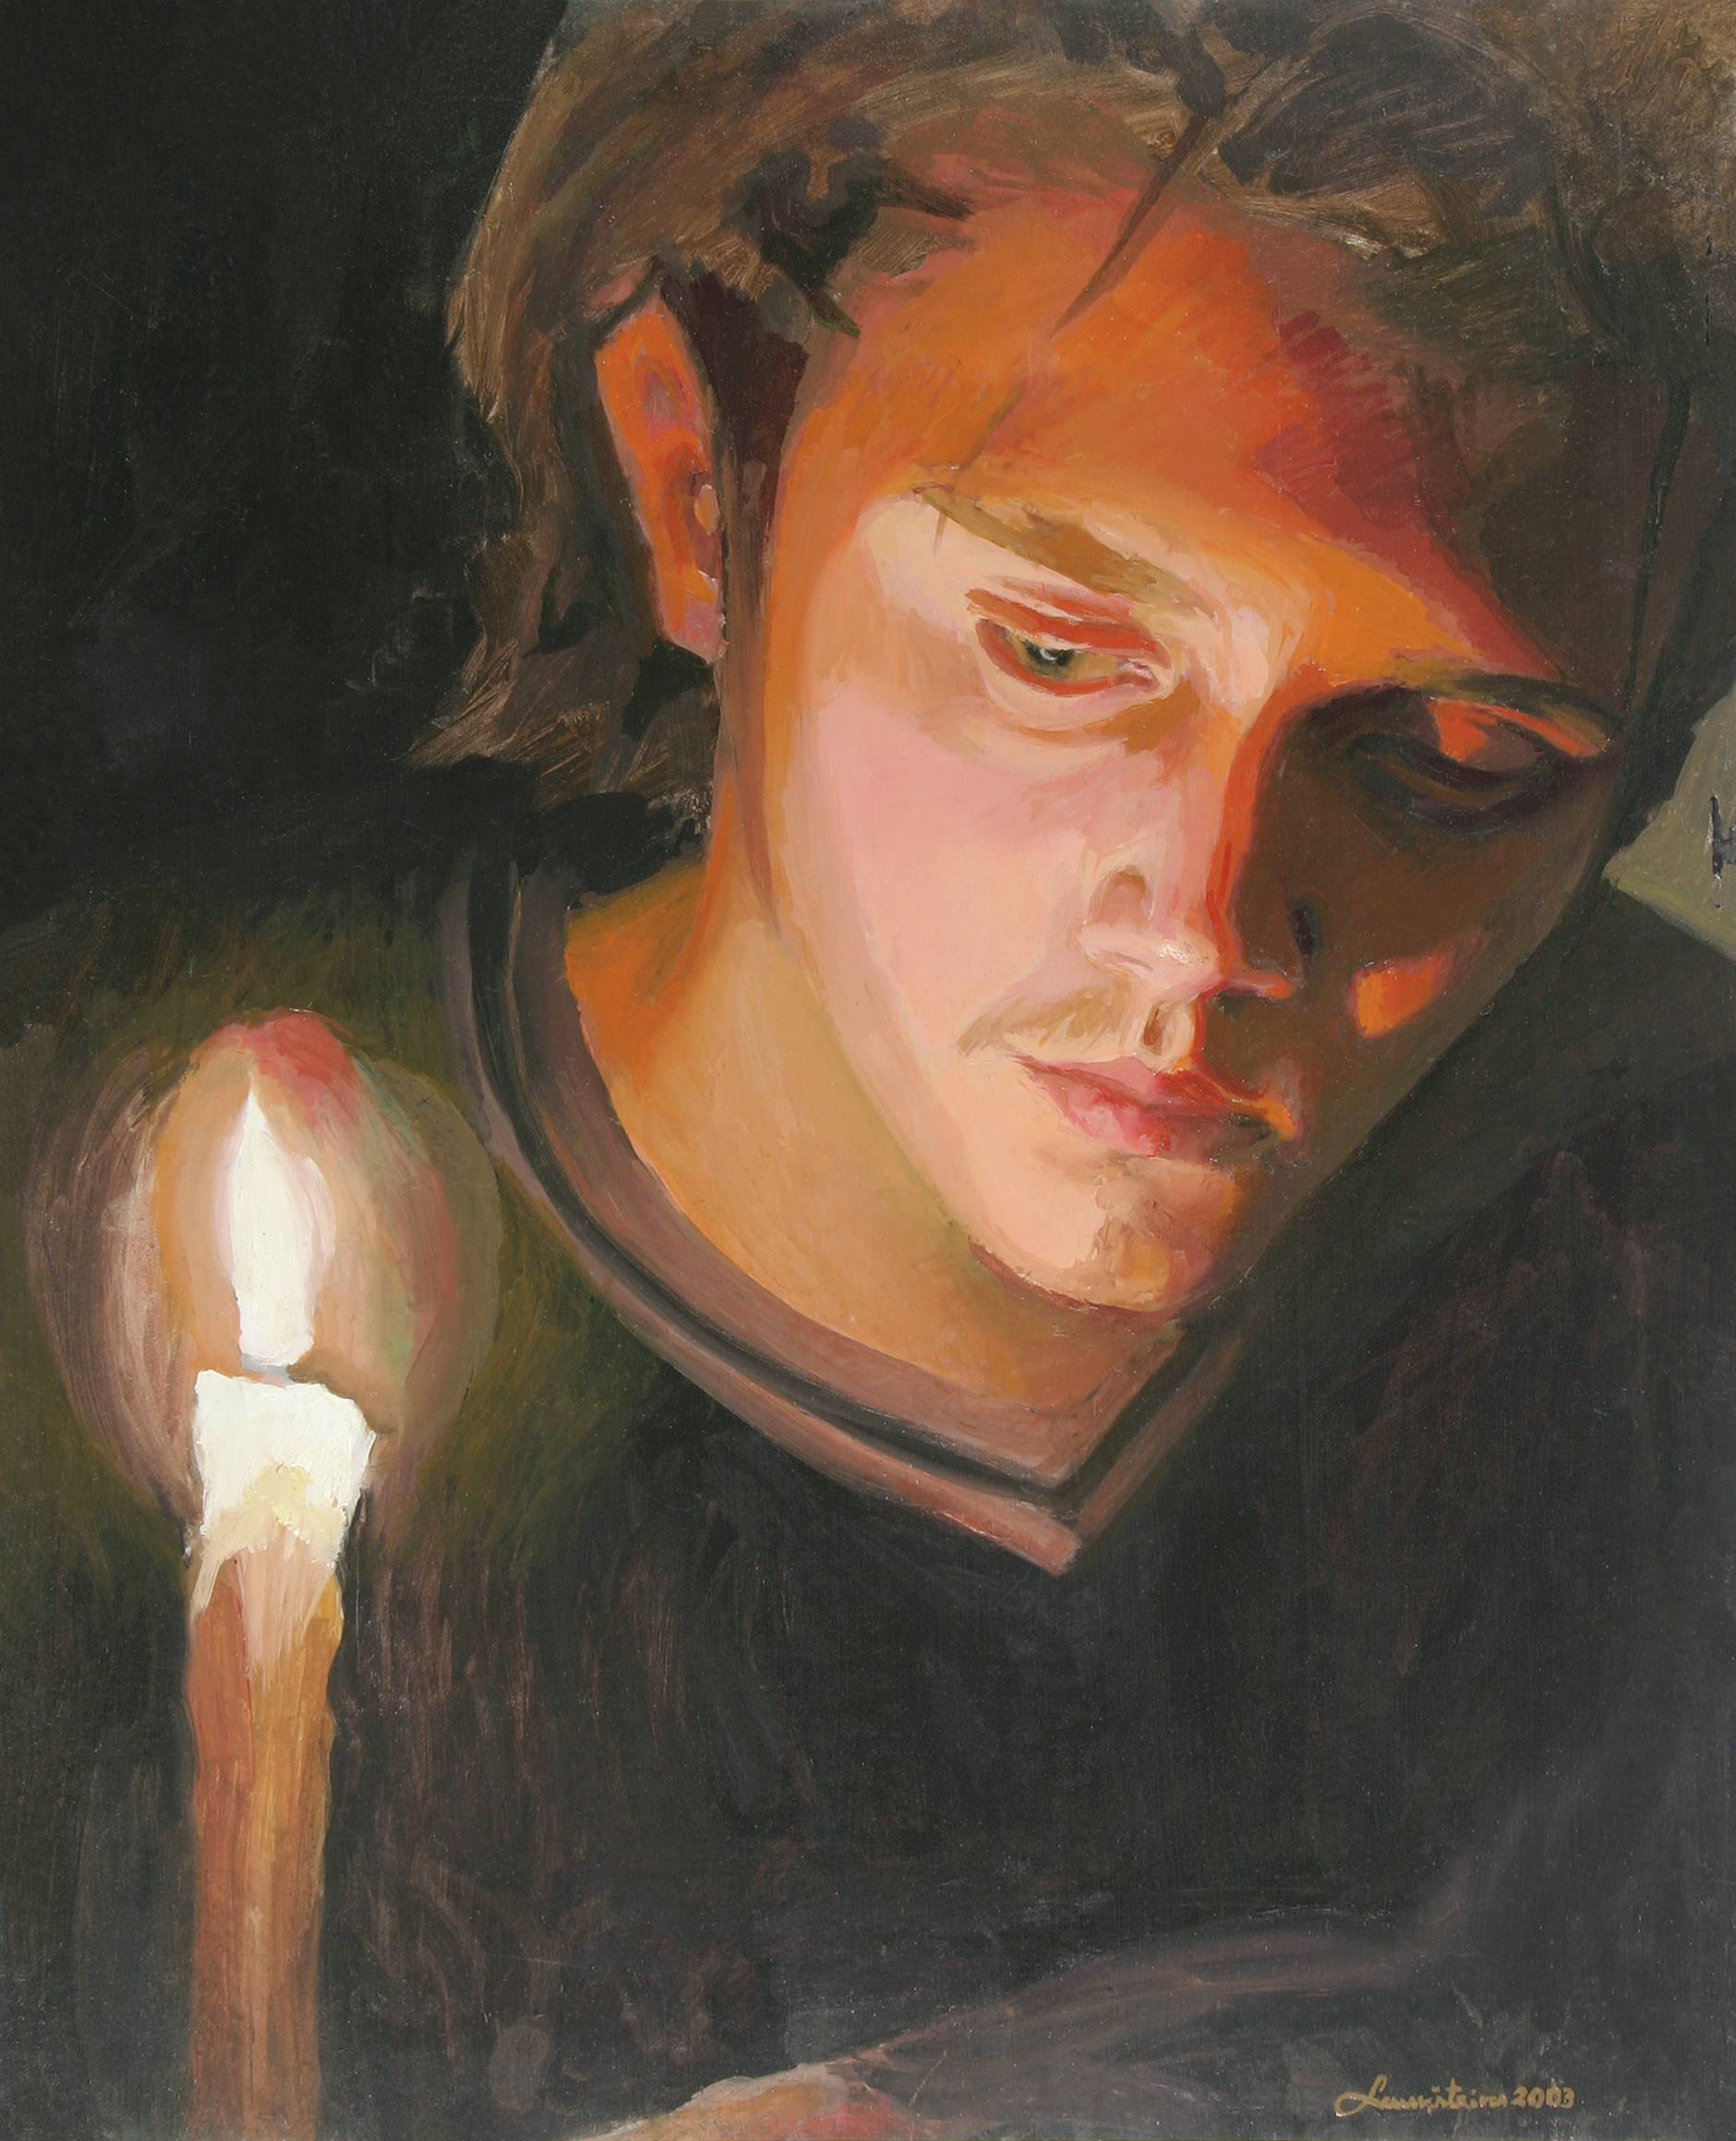 Self-portrait by Candlelight